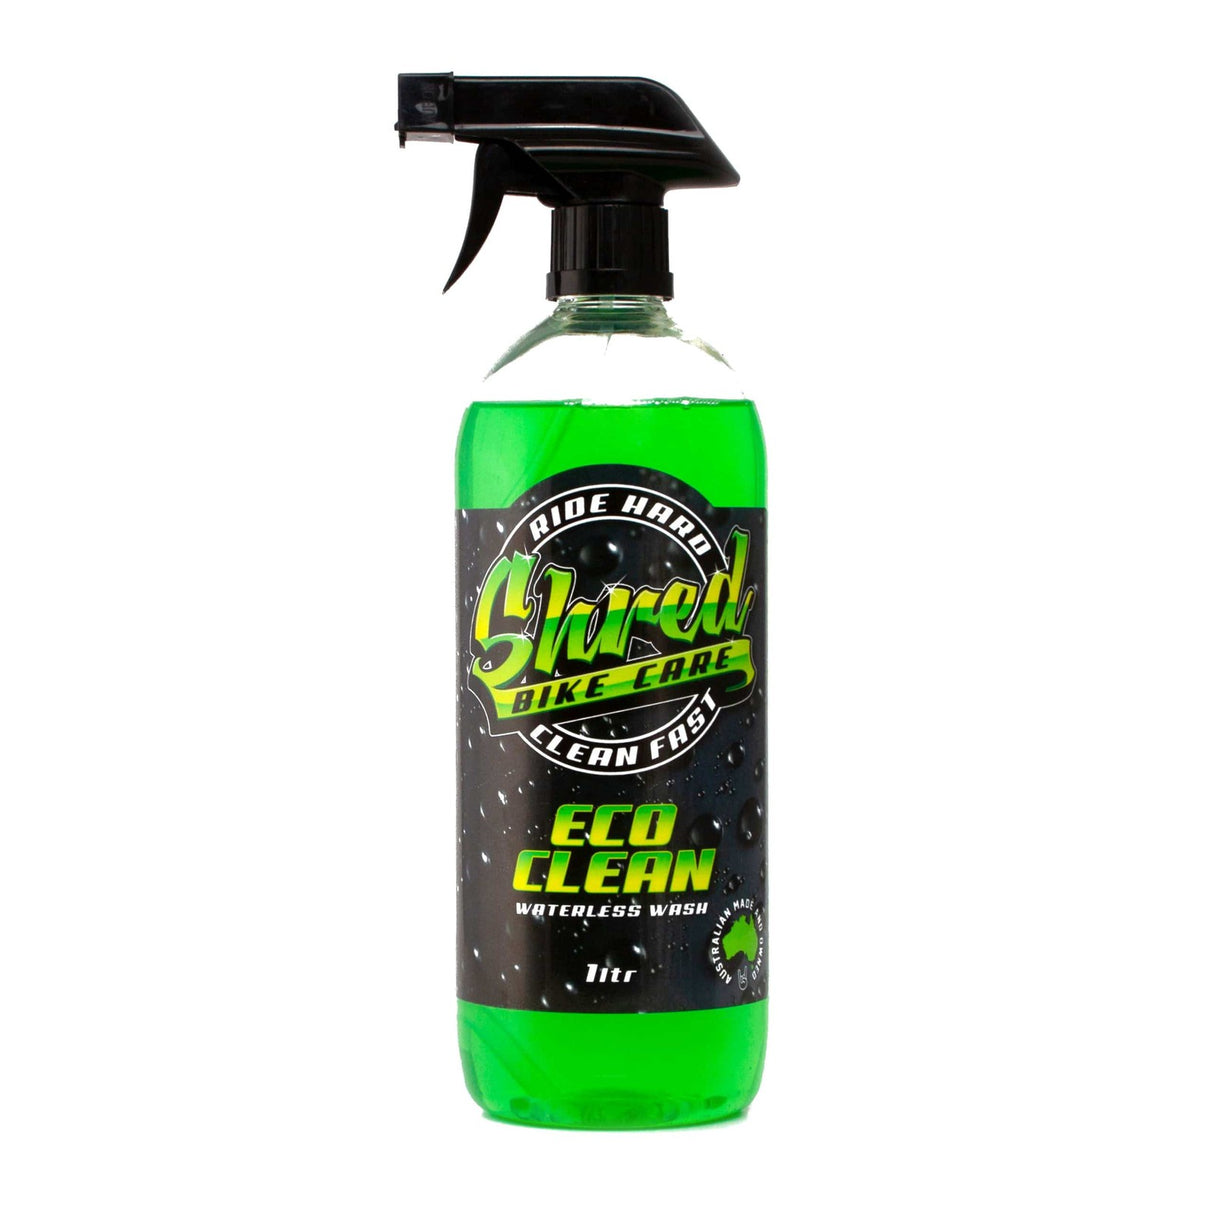 Shred ECO Clean 1L Waterless Wash